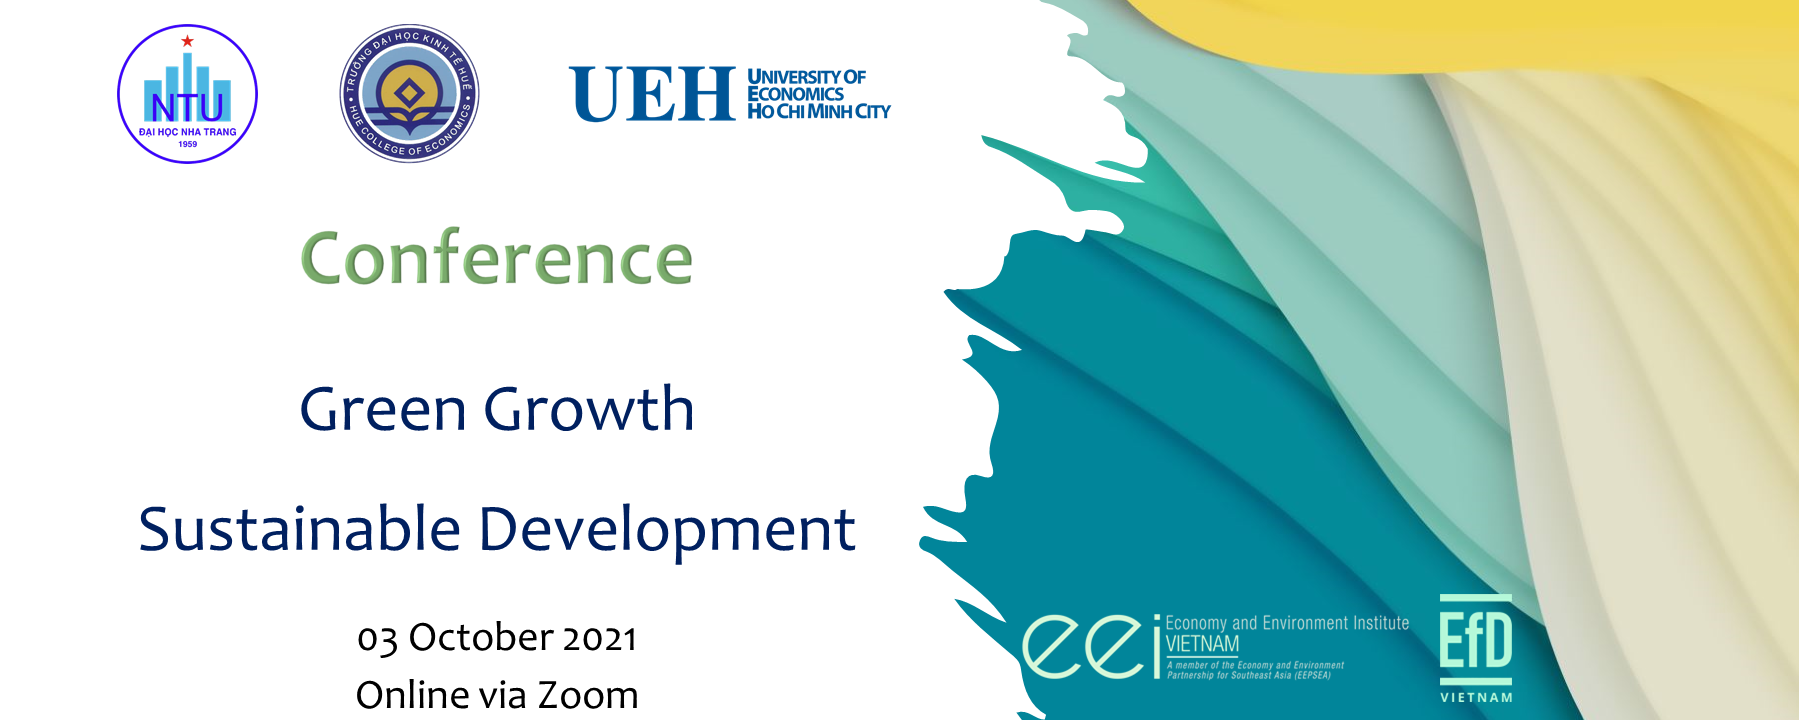 The scientific Conference on "Green growth and sustainable development"